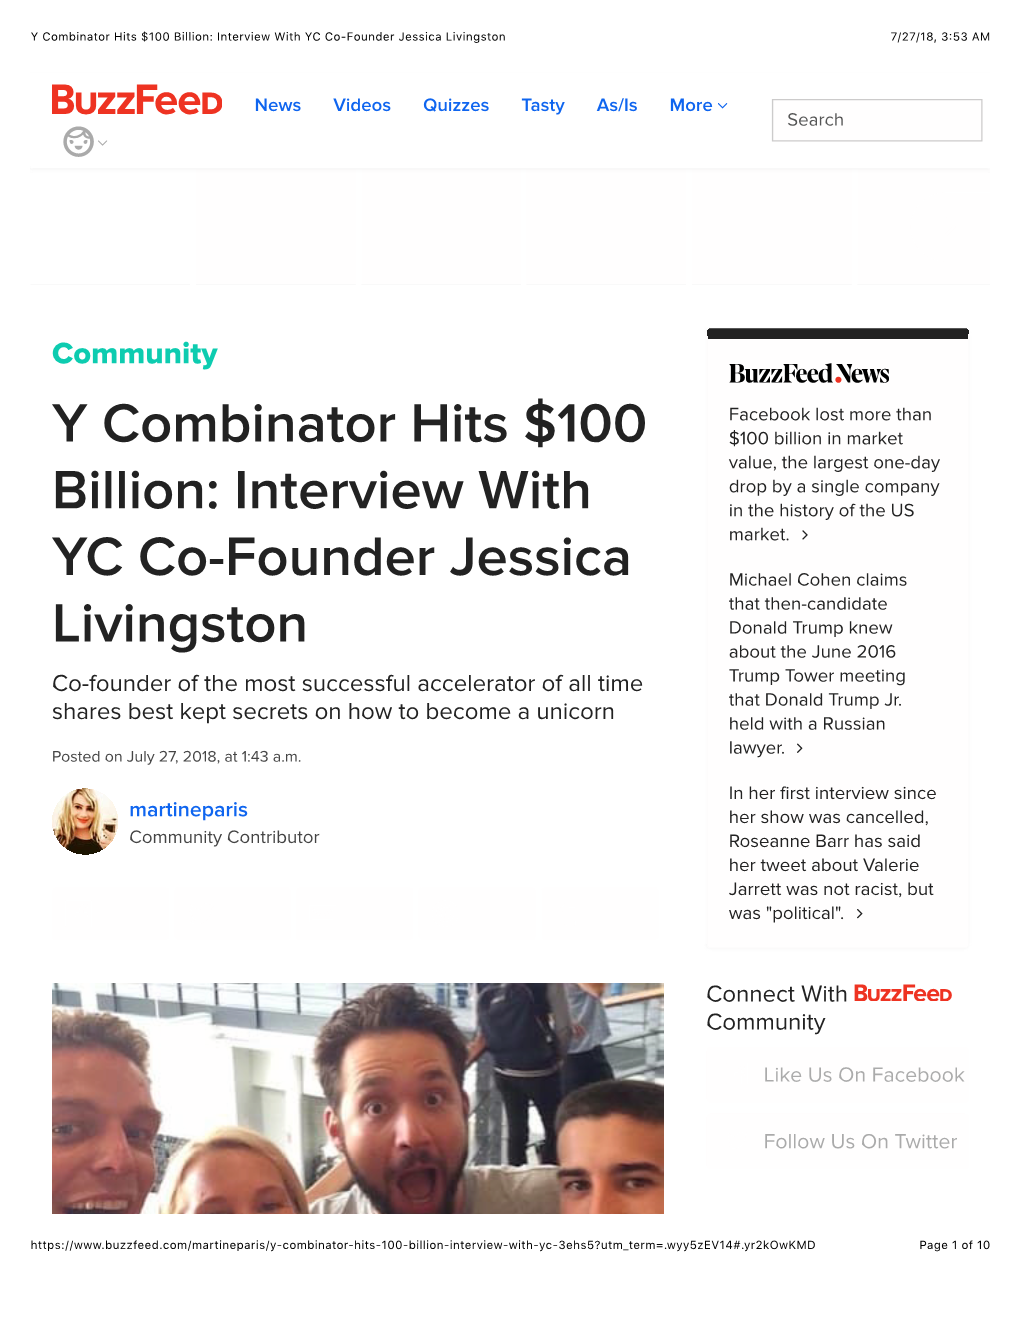 Y Combinator Hits $100 Billion: Interview with YC Co-Founder Jessica Livingston 7/27/18, 3:53 AM